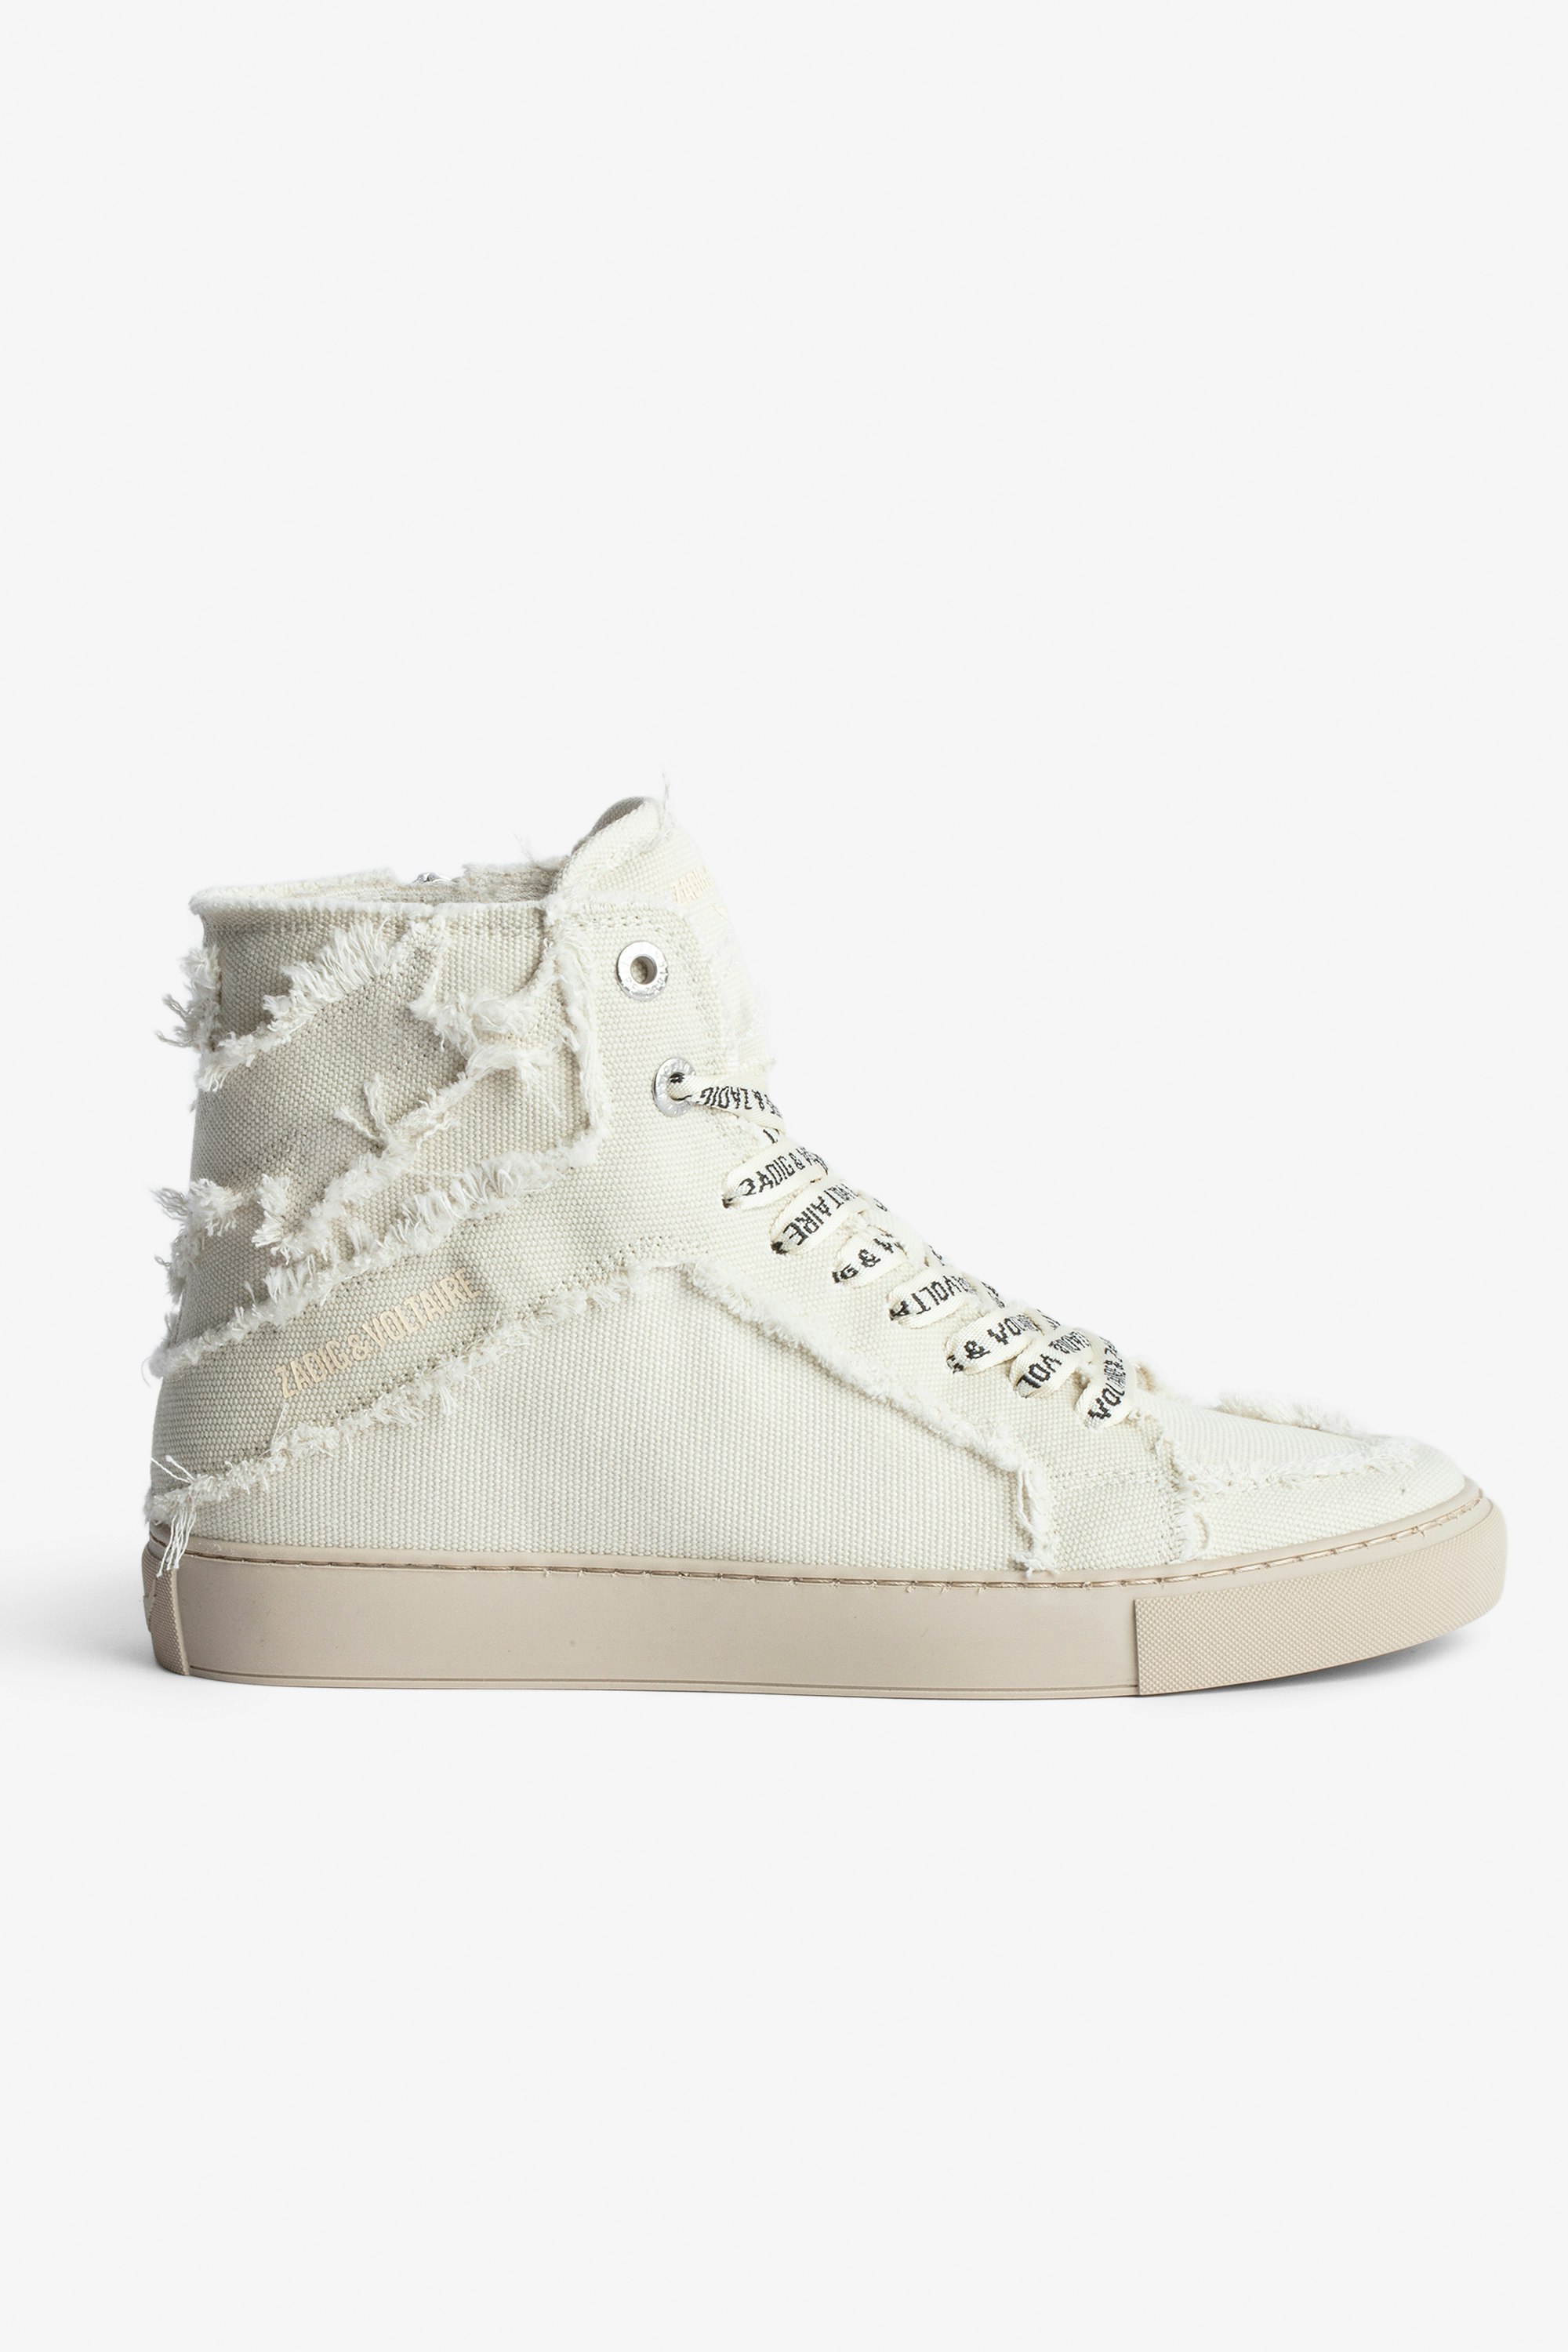 ZV1747 High Flash High-Top Trainers - Women's high-top trainers in ecru cotton canvas